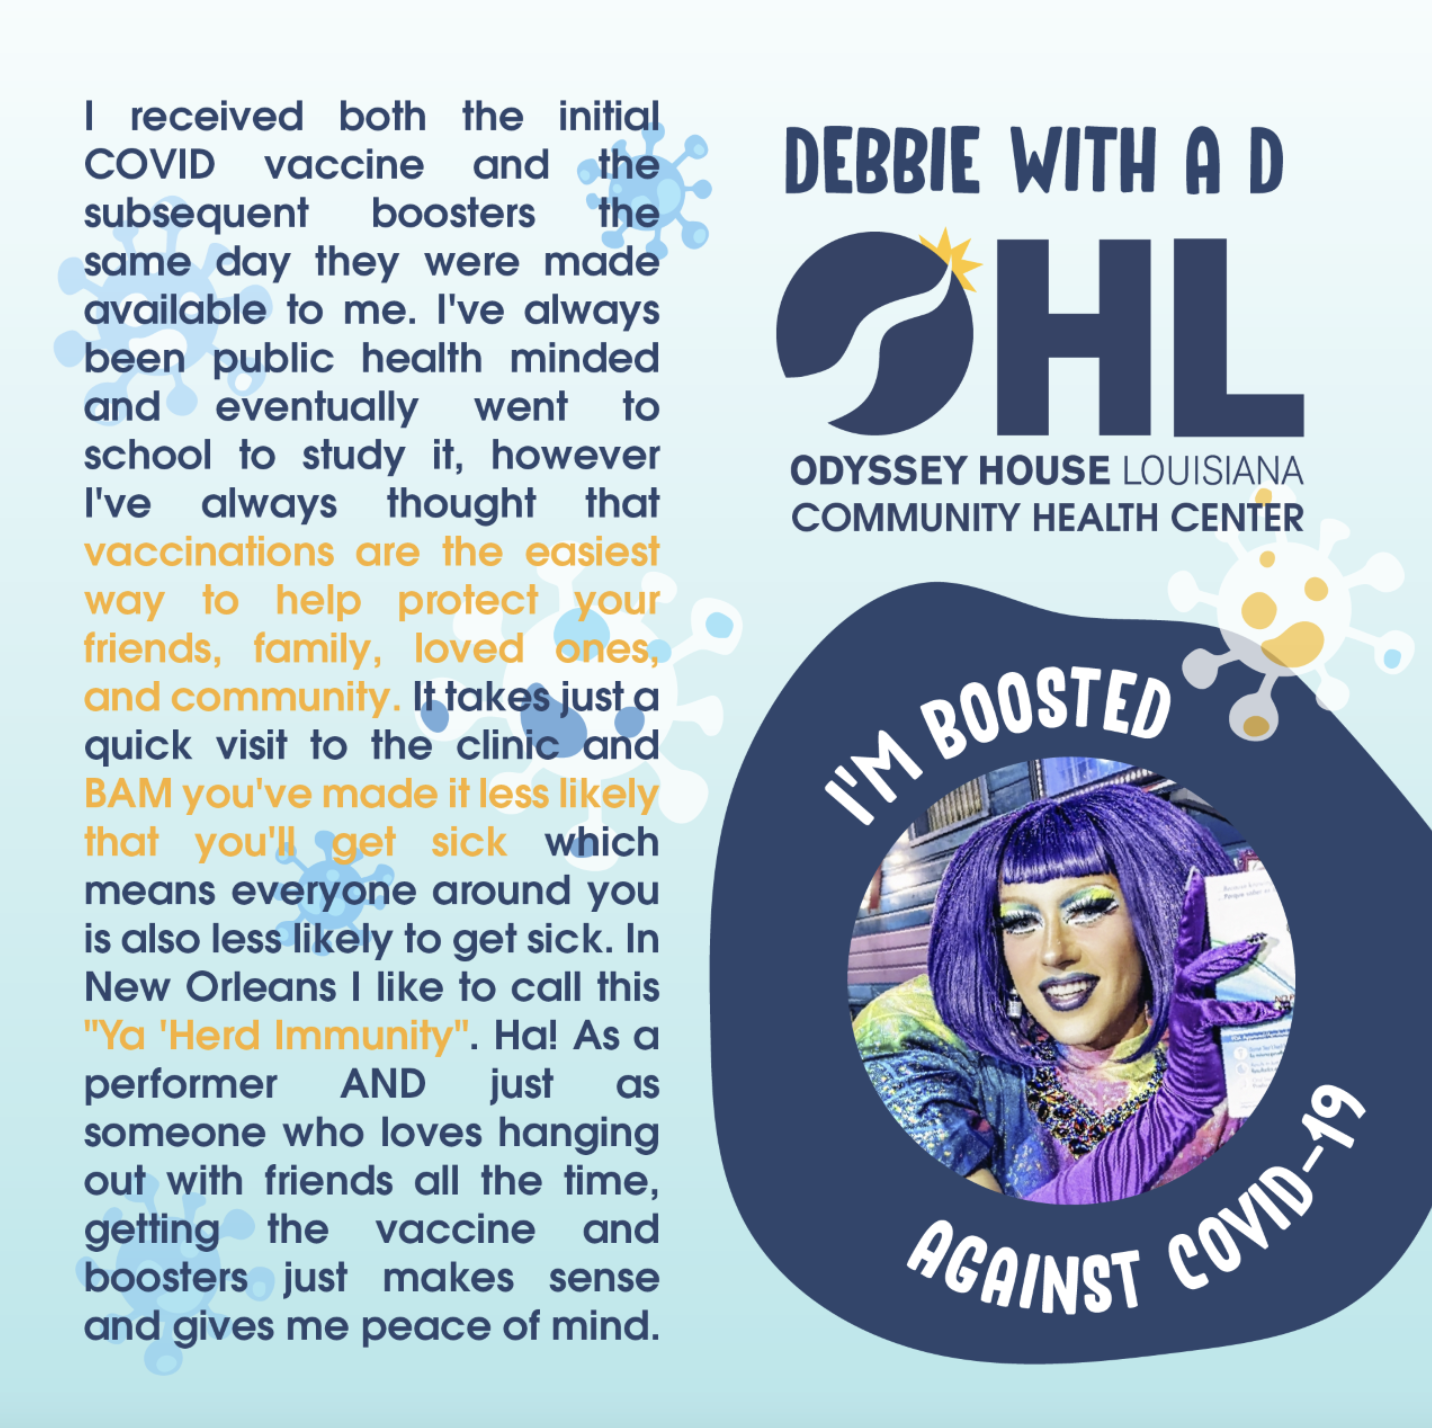 Facebook post includes text alongside an image of a drag queen with a purple bob and bangs and elbow length purple gloves.